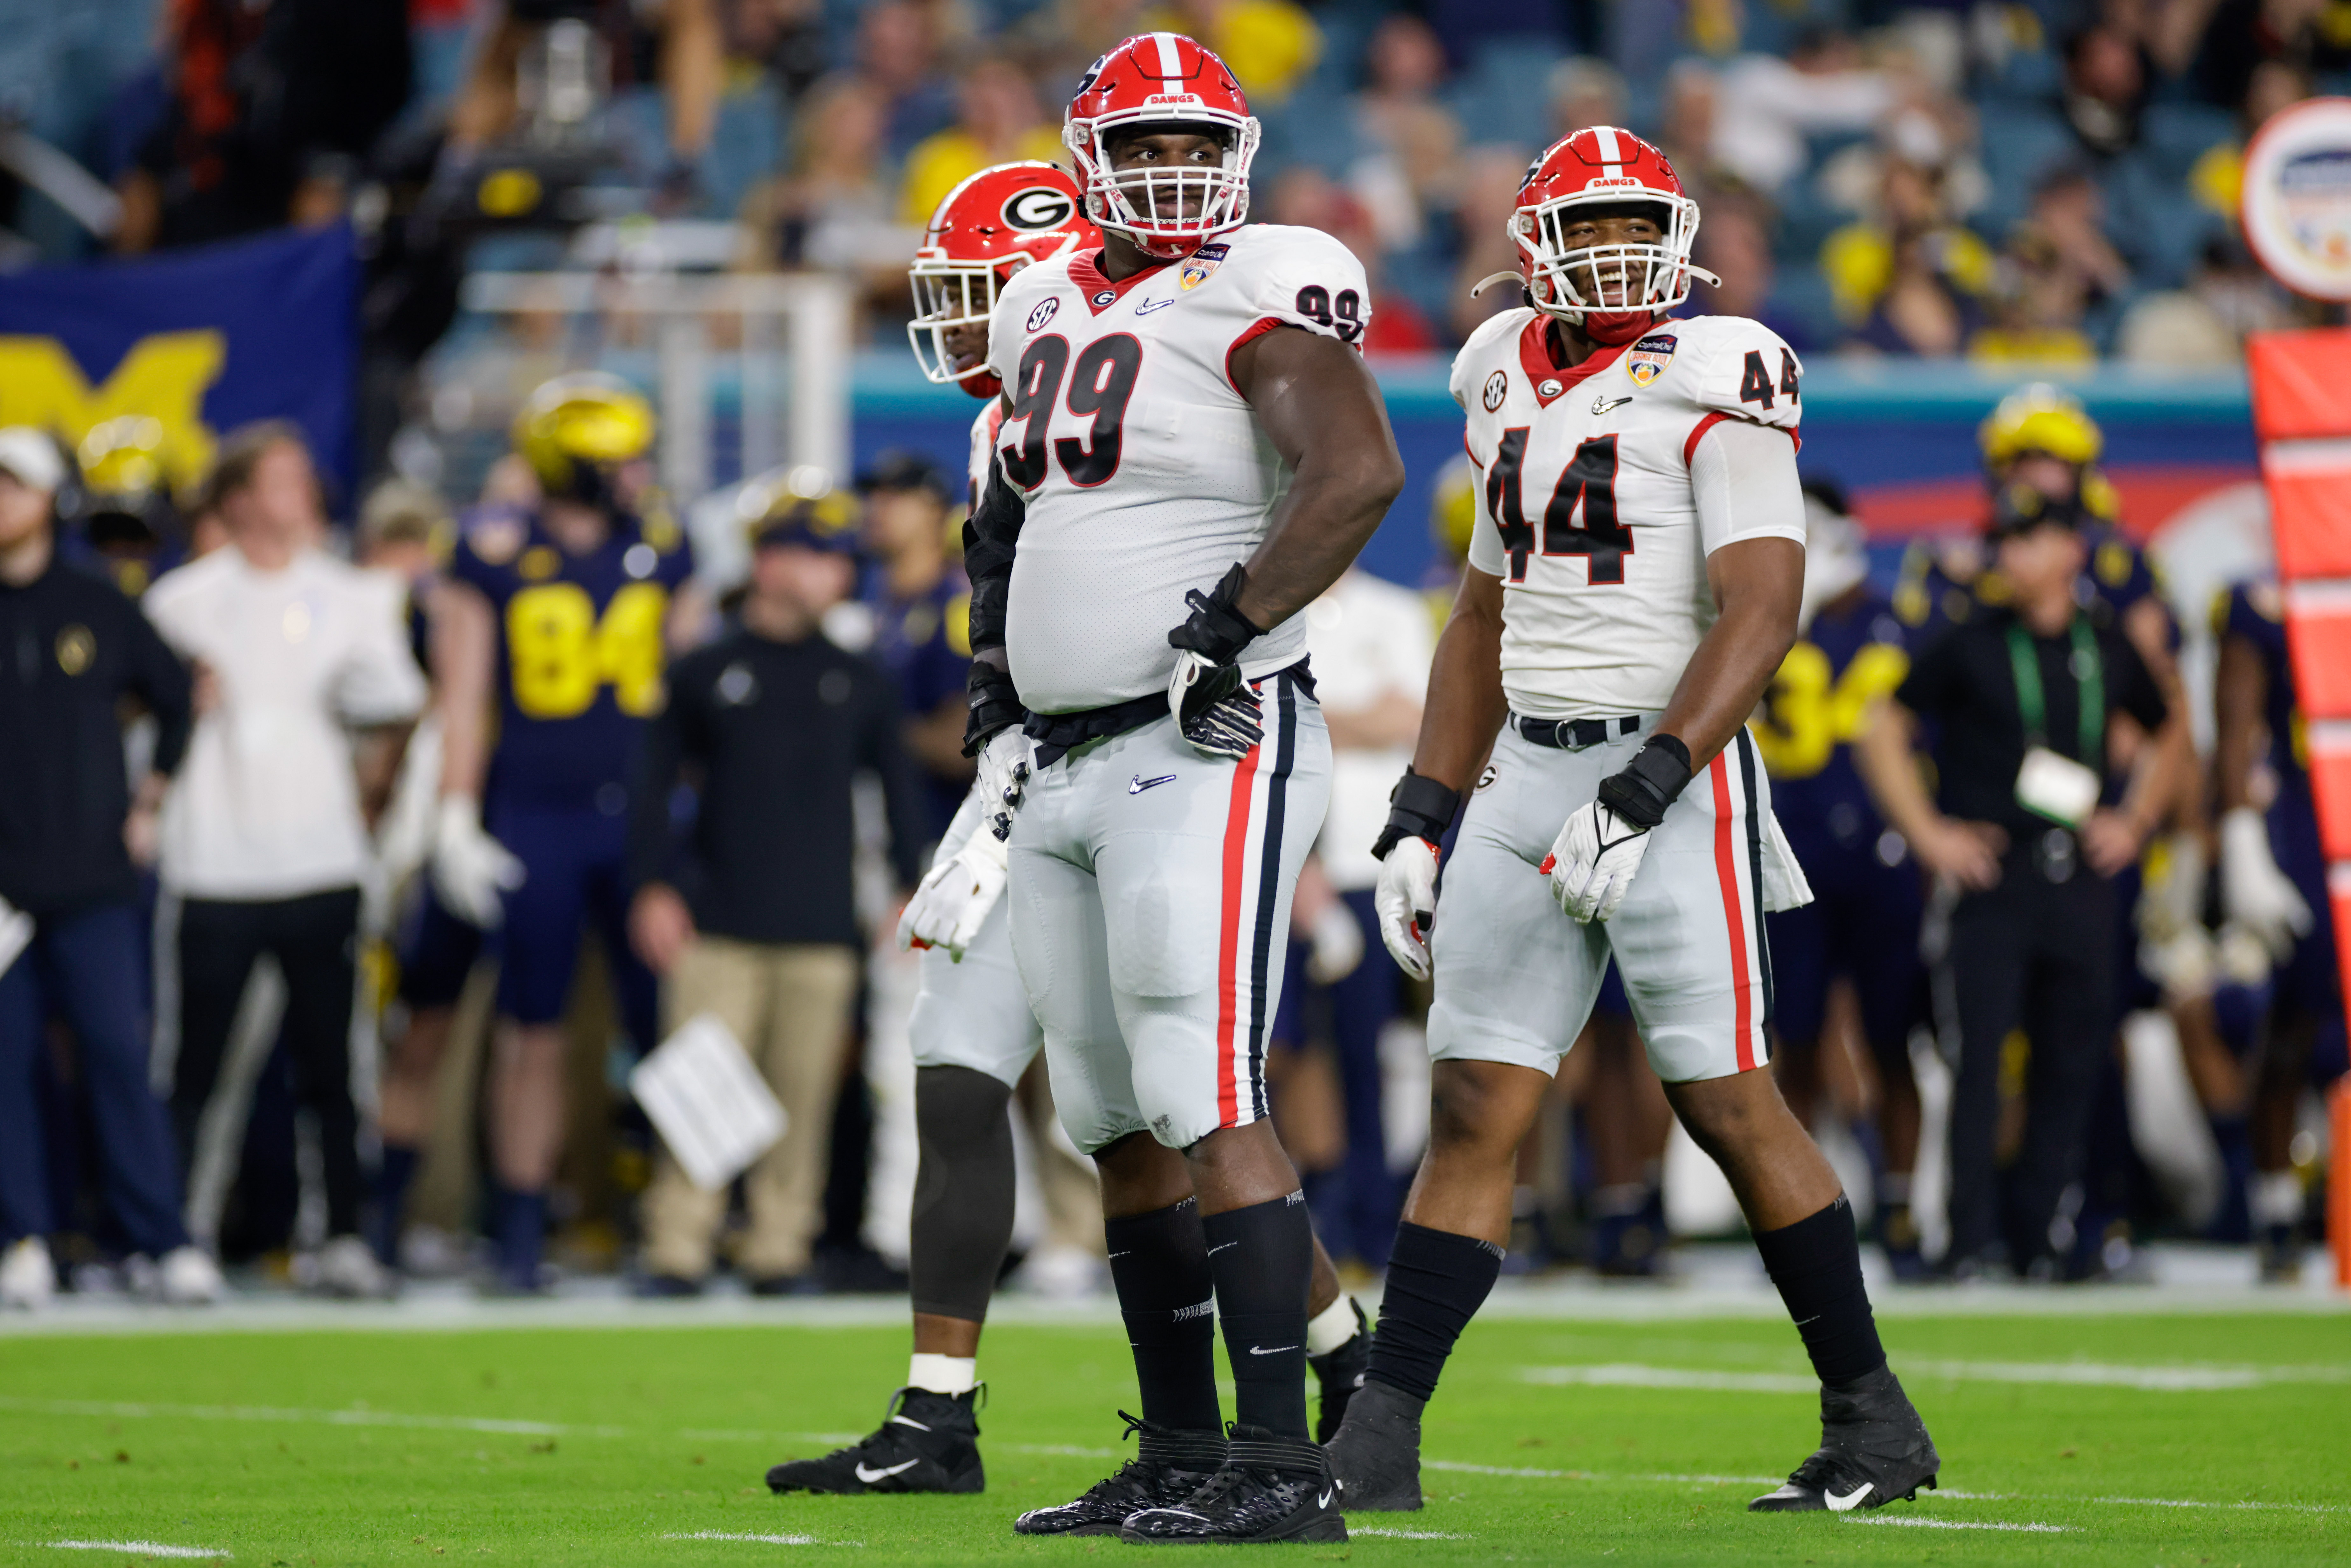 Georgia star Jordan Davis is likely a first round pick in the NFL Draft.